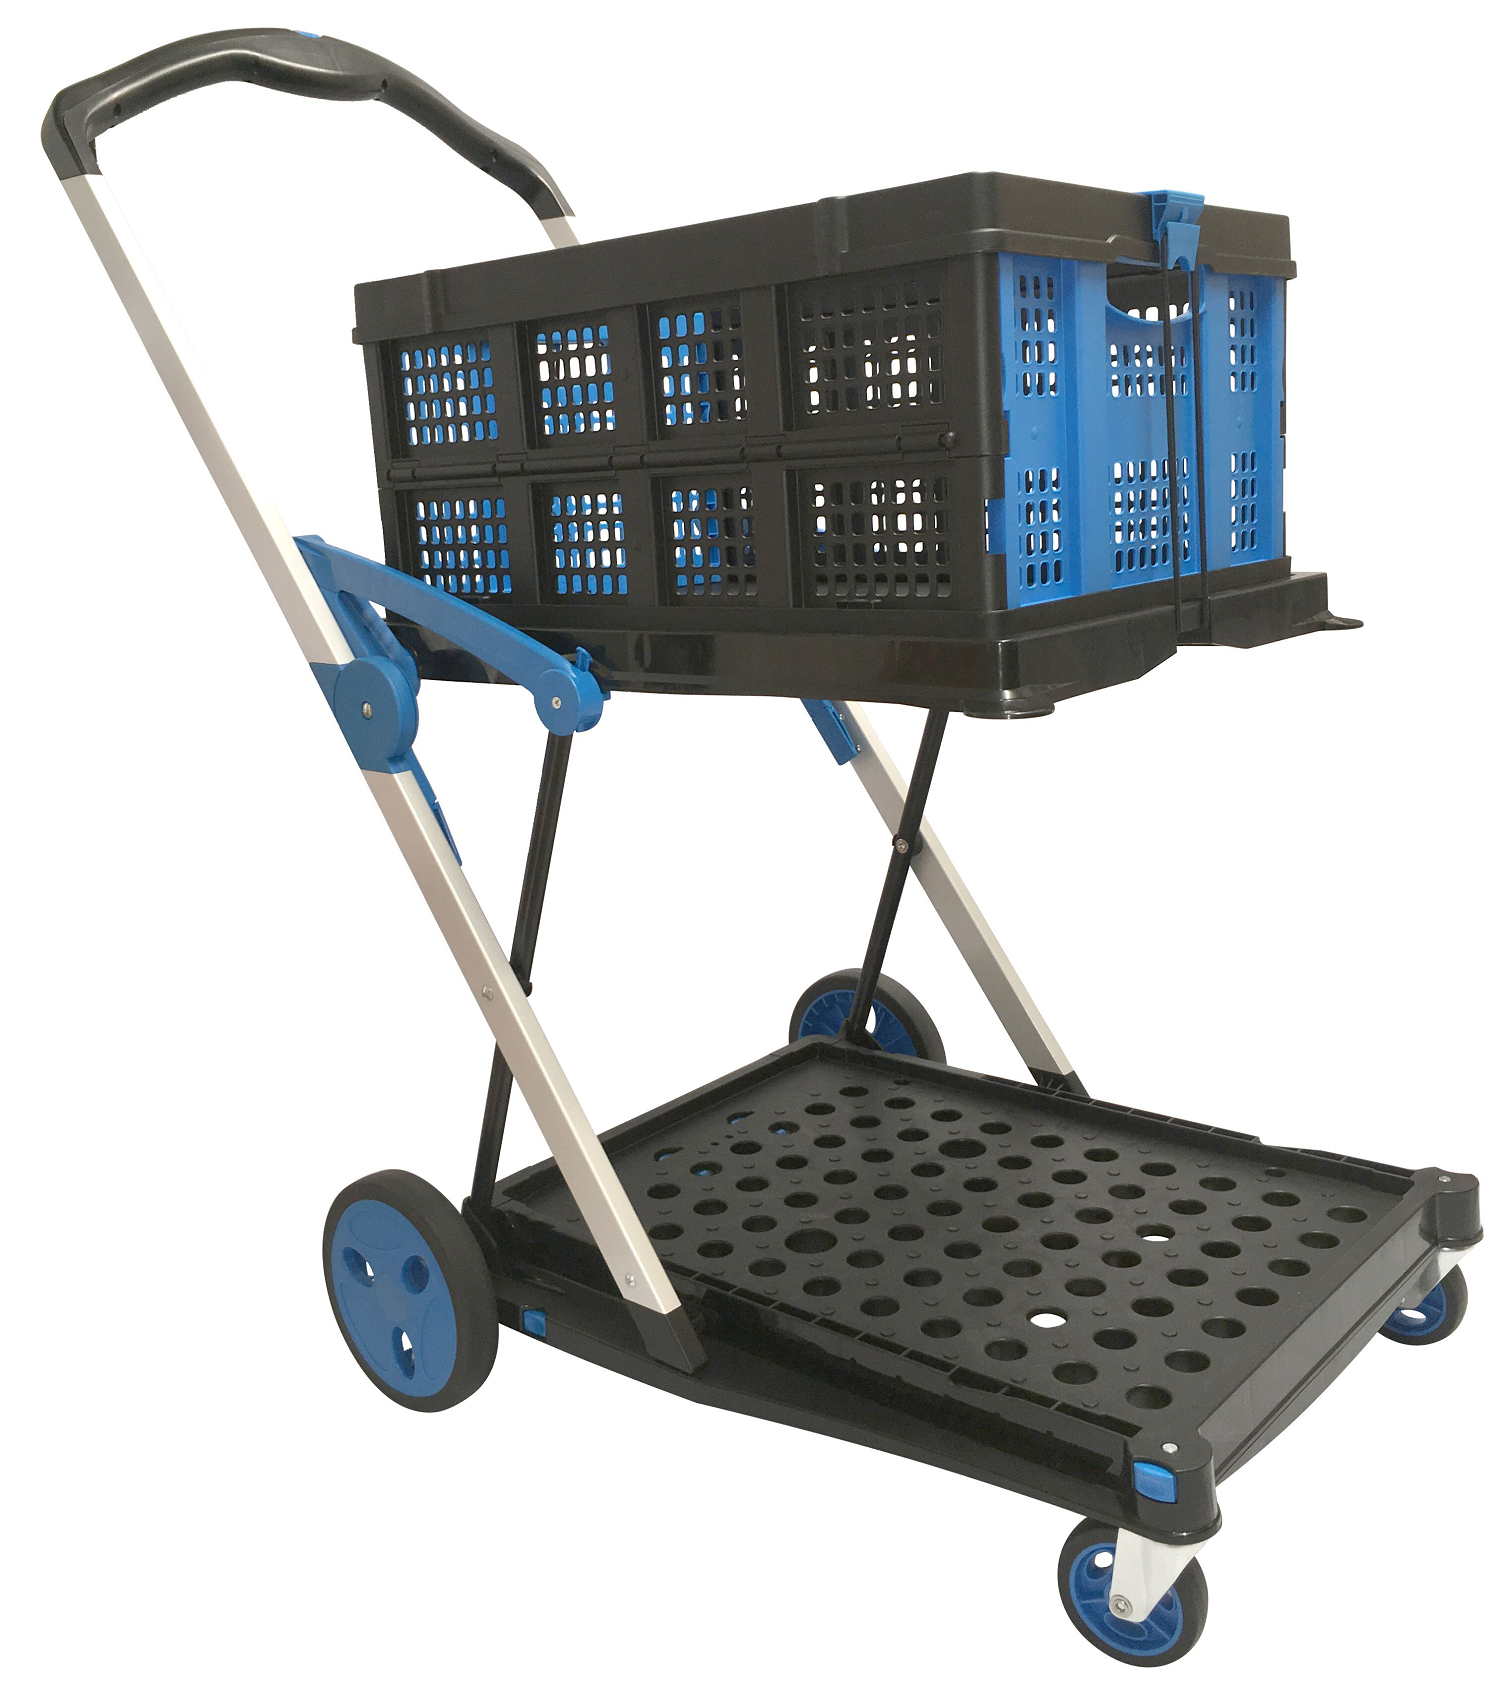 ProPlaz Clever Folding Trolley